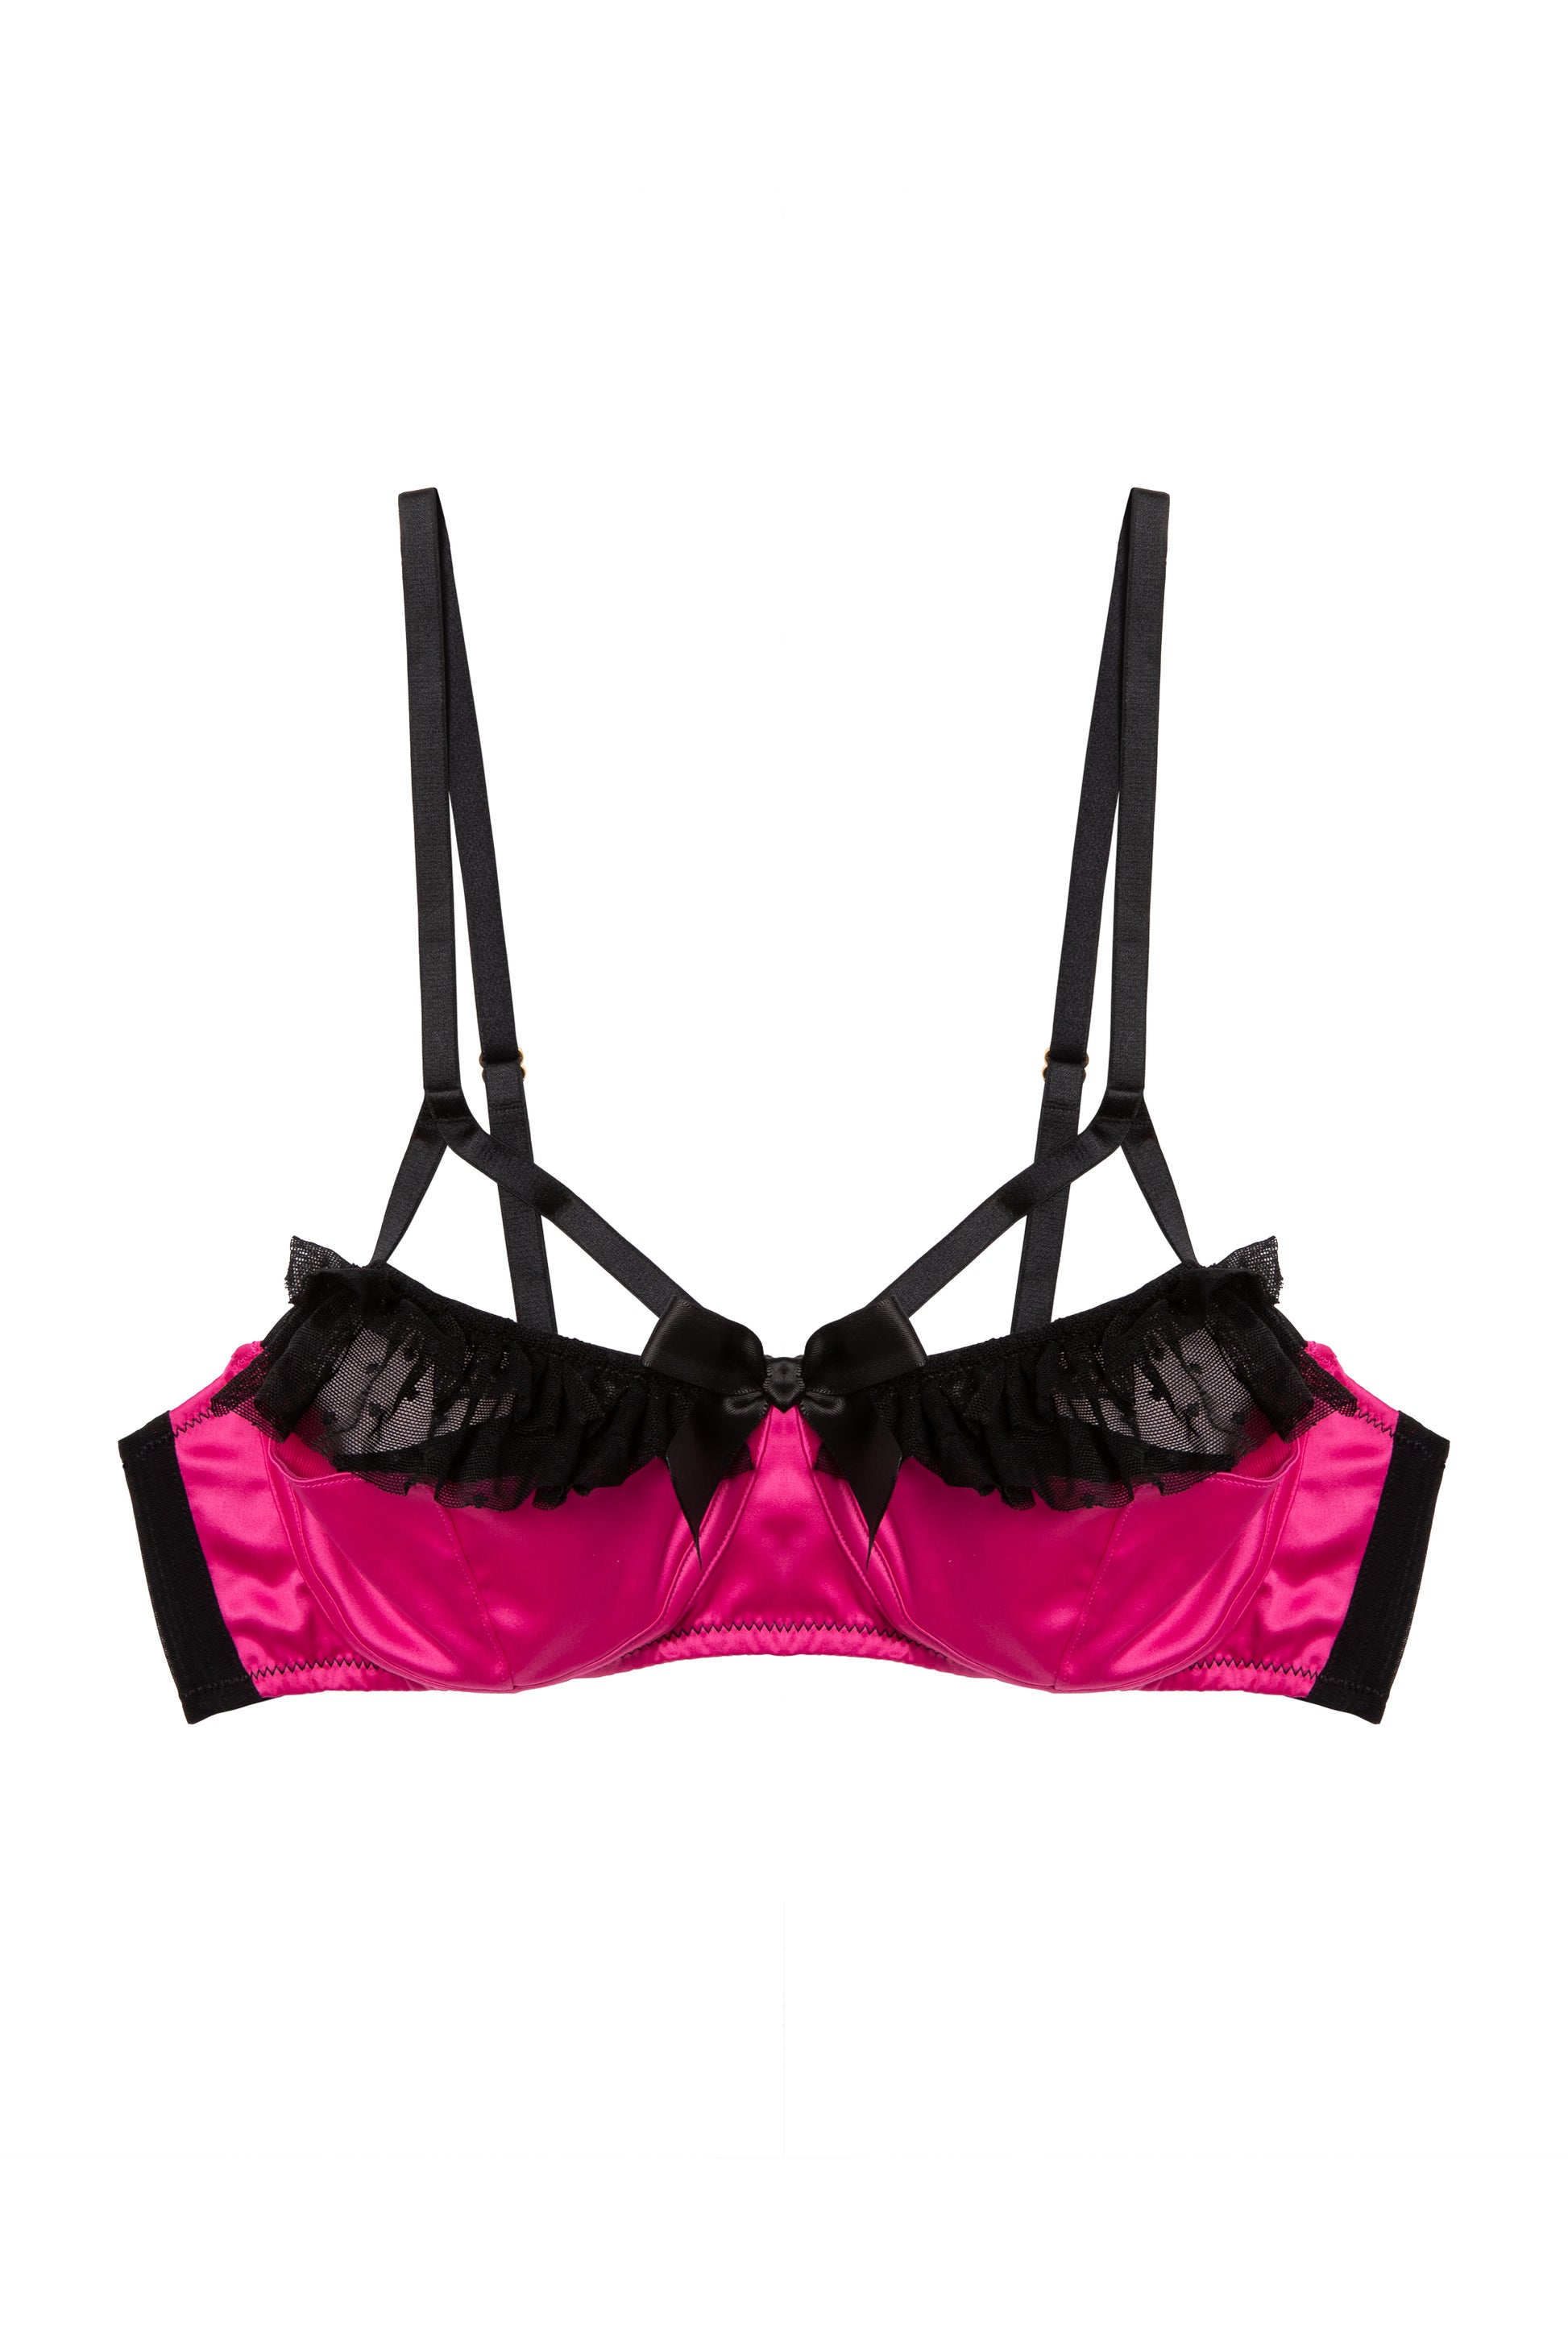 Pink and Black Lace Foam Cup Bra - Life of a Fairy Bra Mother